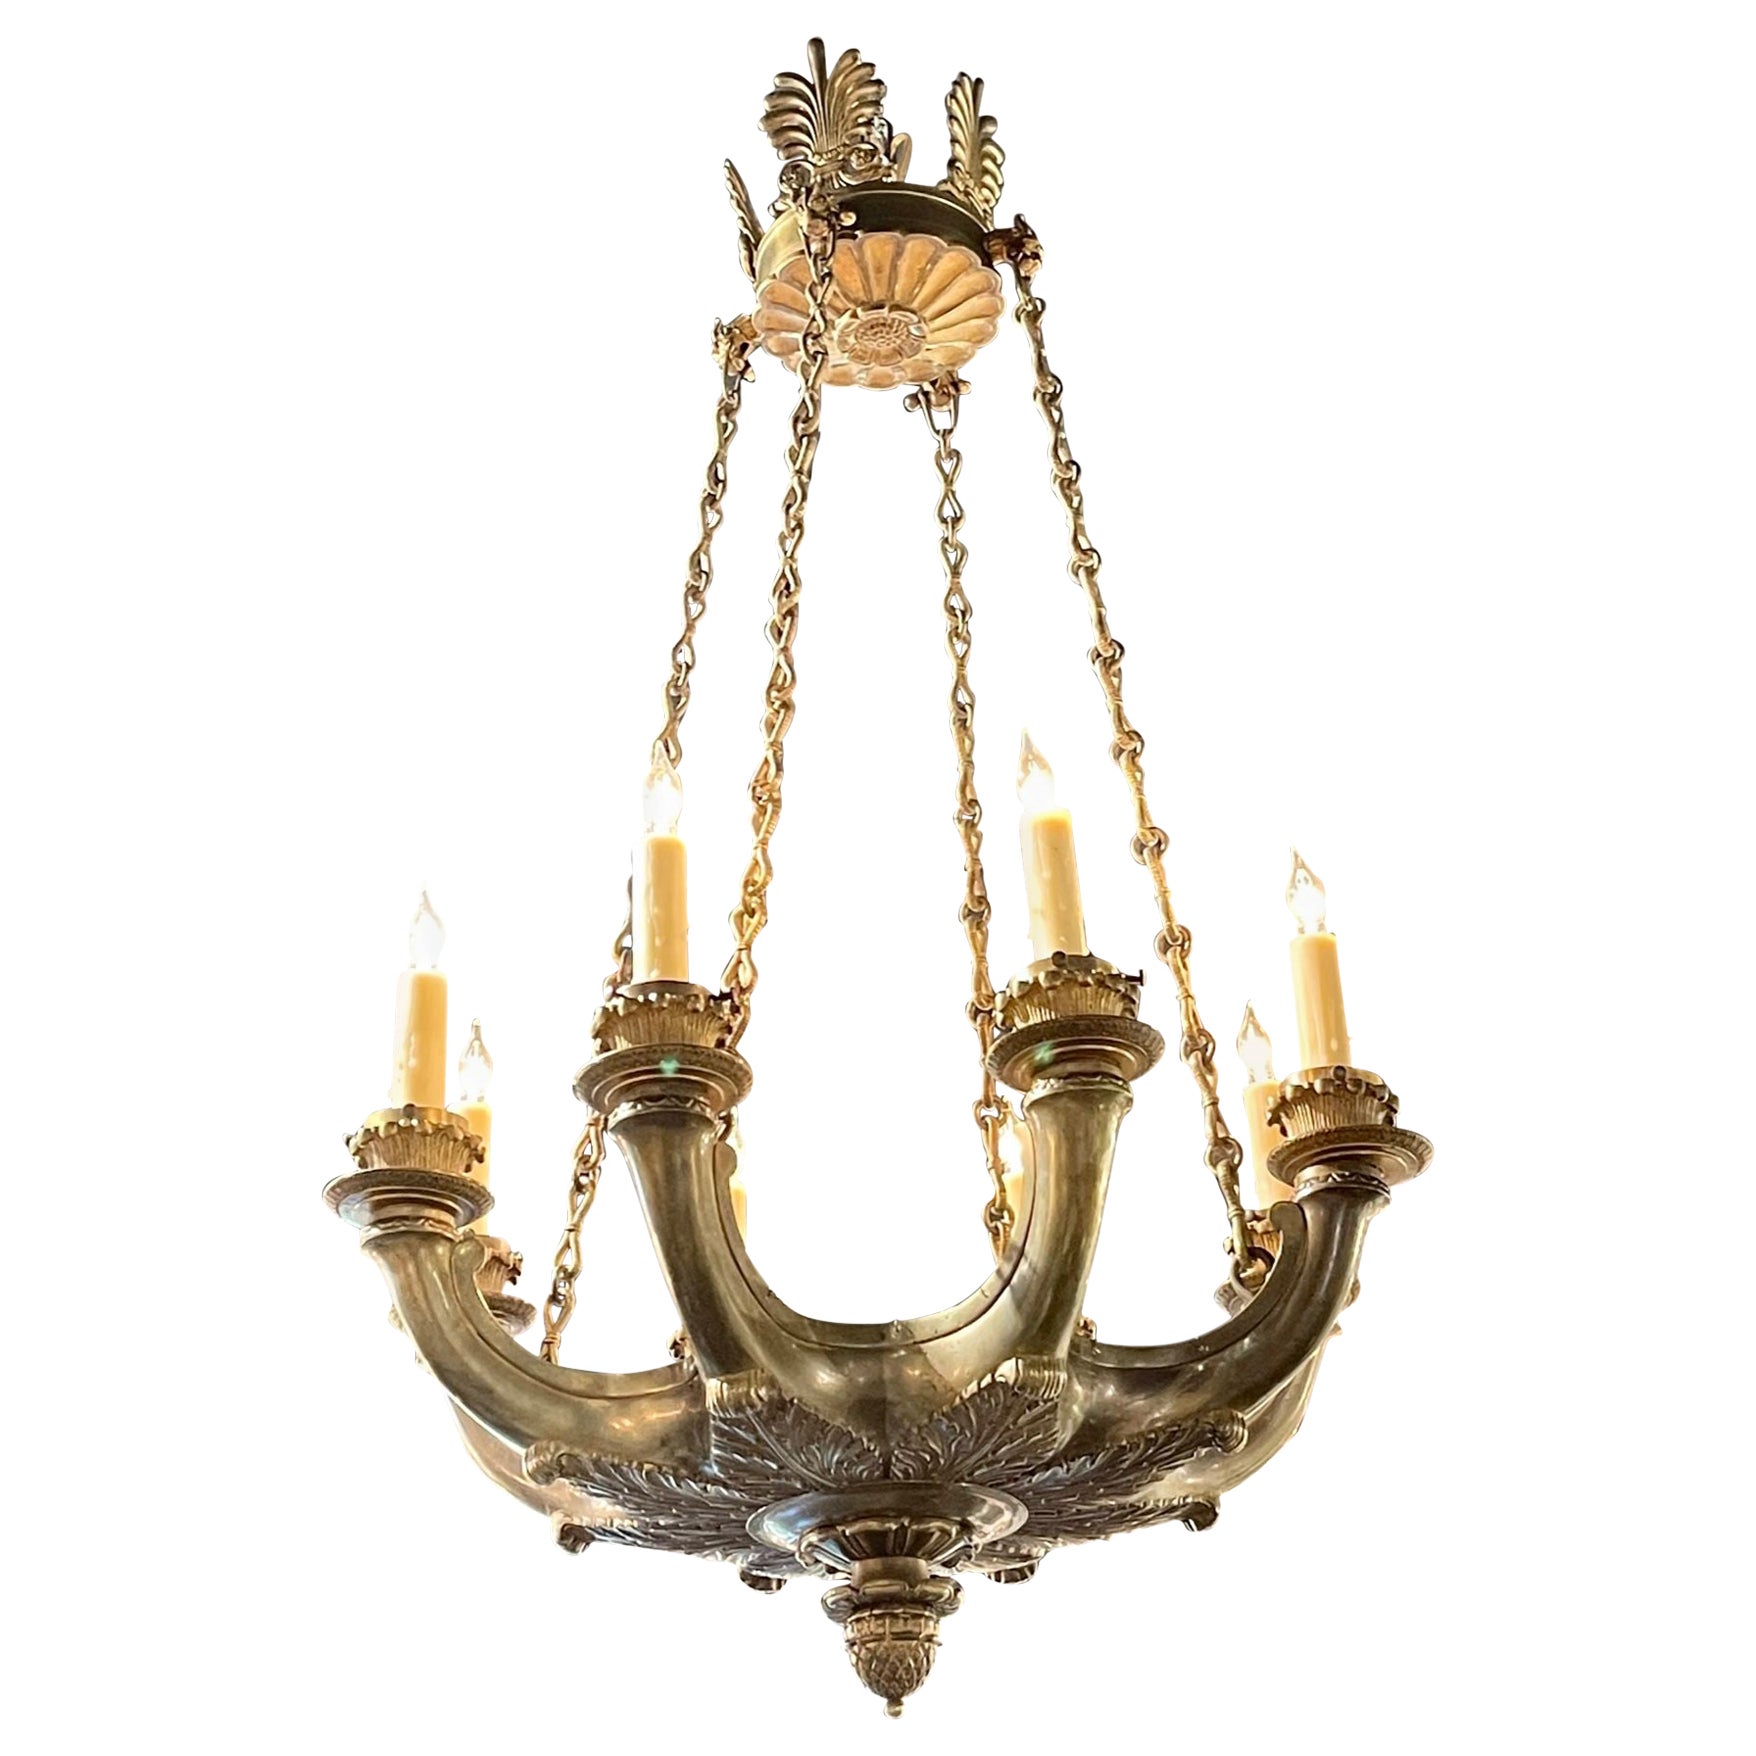 19th Century French Empire Silver and Bronze Chandelier